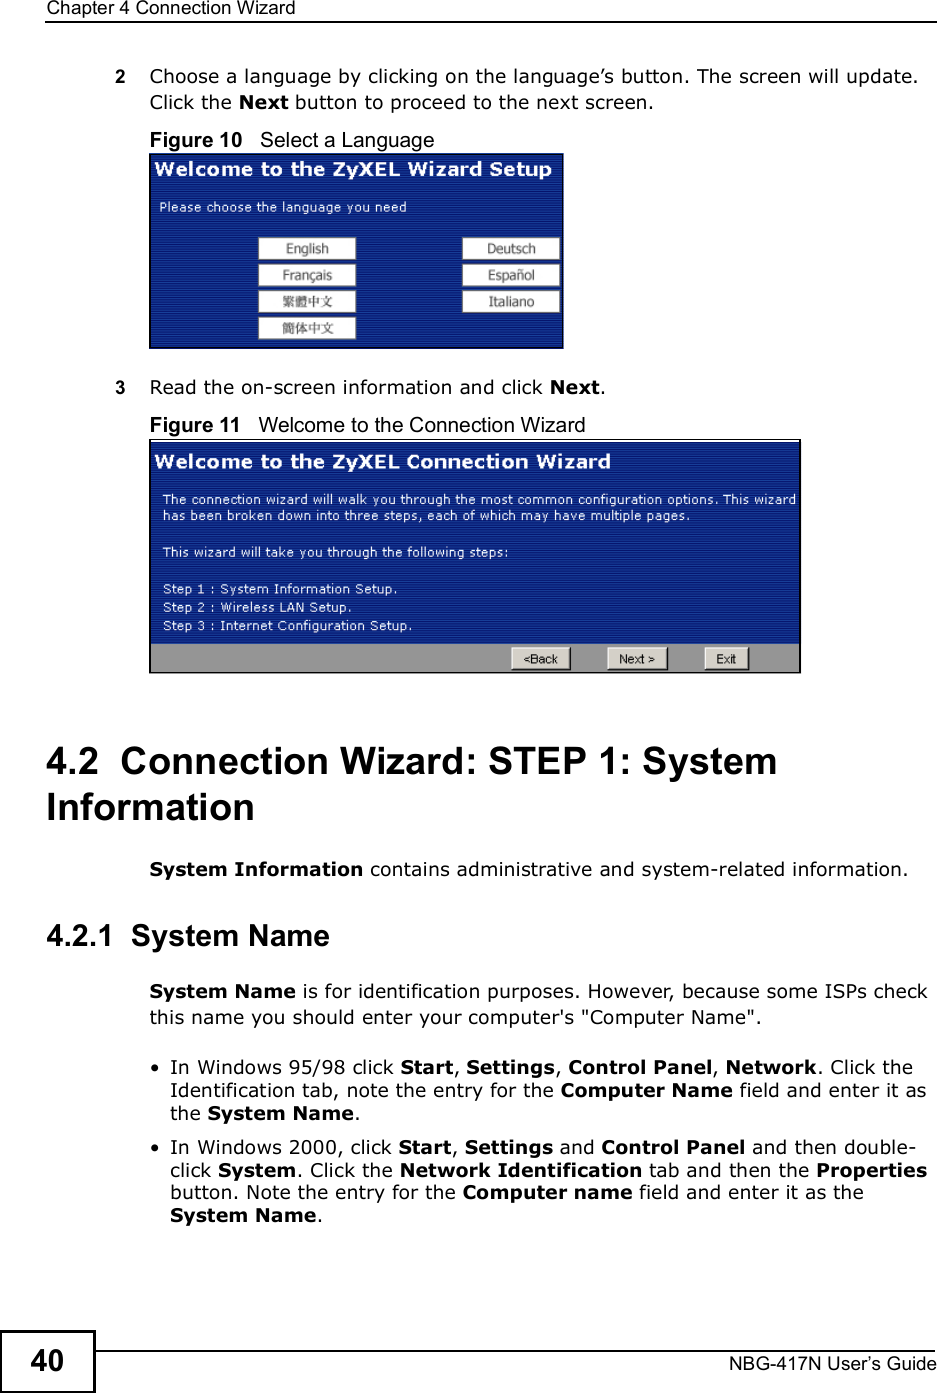 Chapter 4Connection WizardNBG-417N User s Guide402Choose a language by clicking on the language!s button. The screen will update. Click the Next button to proceed to the next screen.Figure 10   Select a Language3Read the on-screen information and click Next.Figure 11   Welcome to the Connection Wizard4.2  Connection Wizard: STEP 1: System InformationSystem Information contains administrative and system-related information.4.2.1  System NameSystem Name is for identification purposes. However, because some ISPs check this name you should enter your computer&apos;s &quot;Computer Name&quot;.  In Windows 95/98 click Start, Settings, Control Panel, Network. Click the Identification tab, note the entry for the Computer Name field and enter it as the System Name. In Windows 2000, click Start, Settings and Control Panel and then double-click System. Click the Network Identification tab and then the Properties button. Note the entry for the Computer name field and enter it as the System Name.